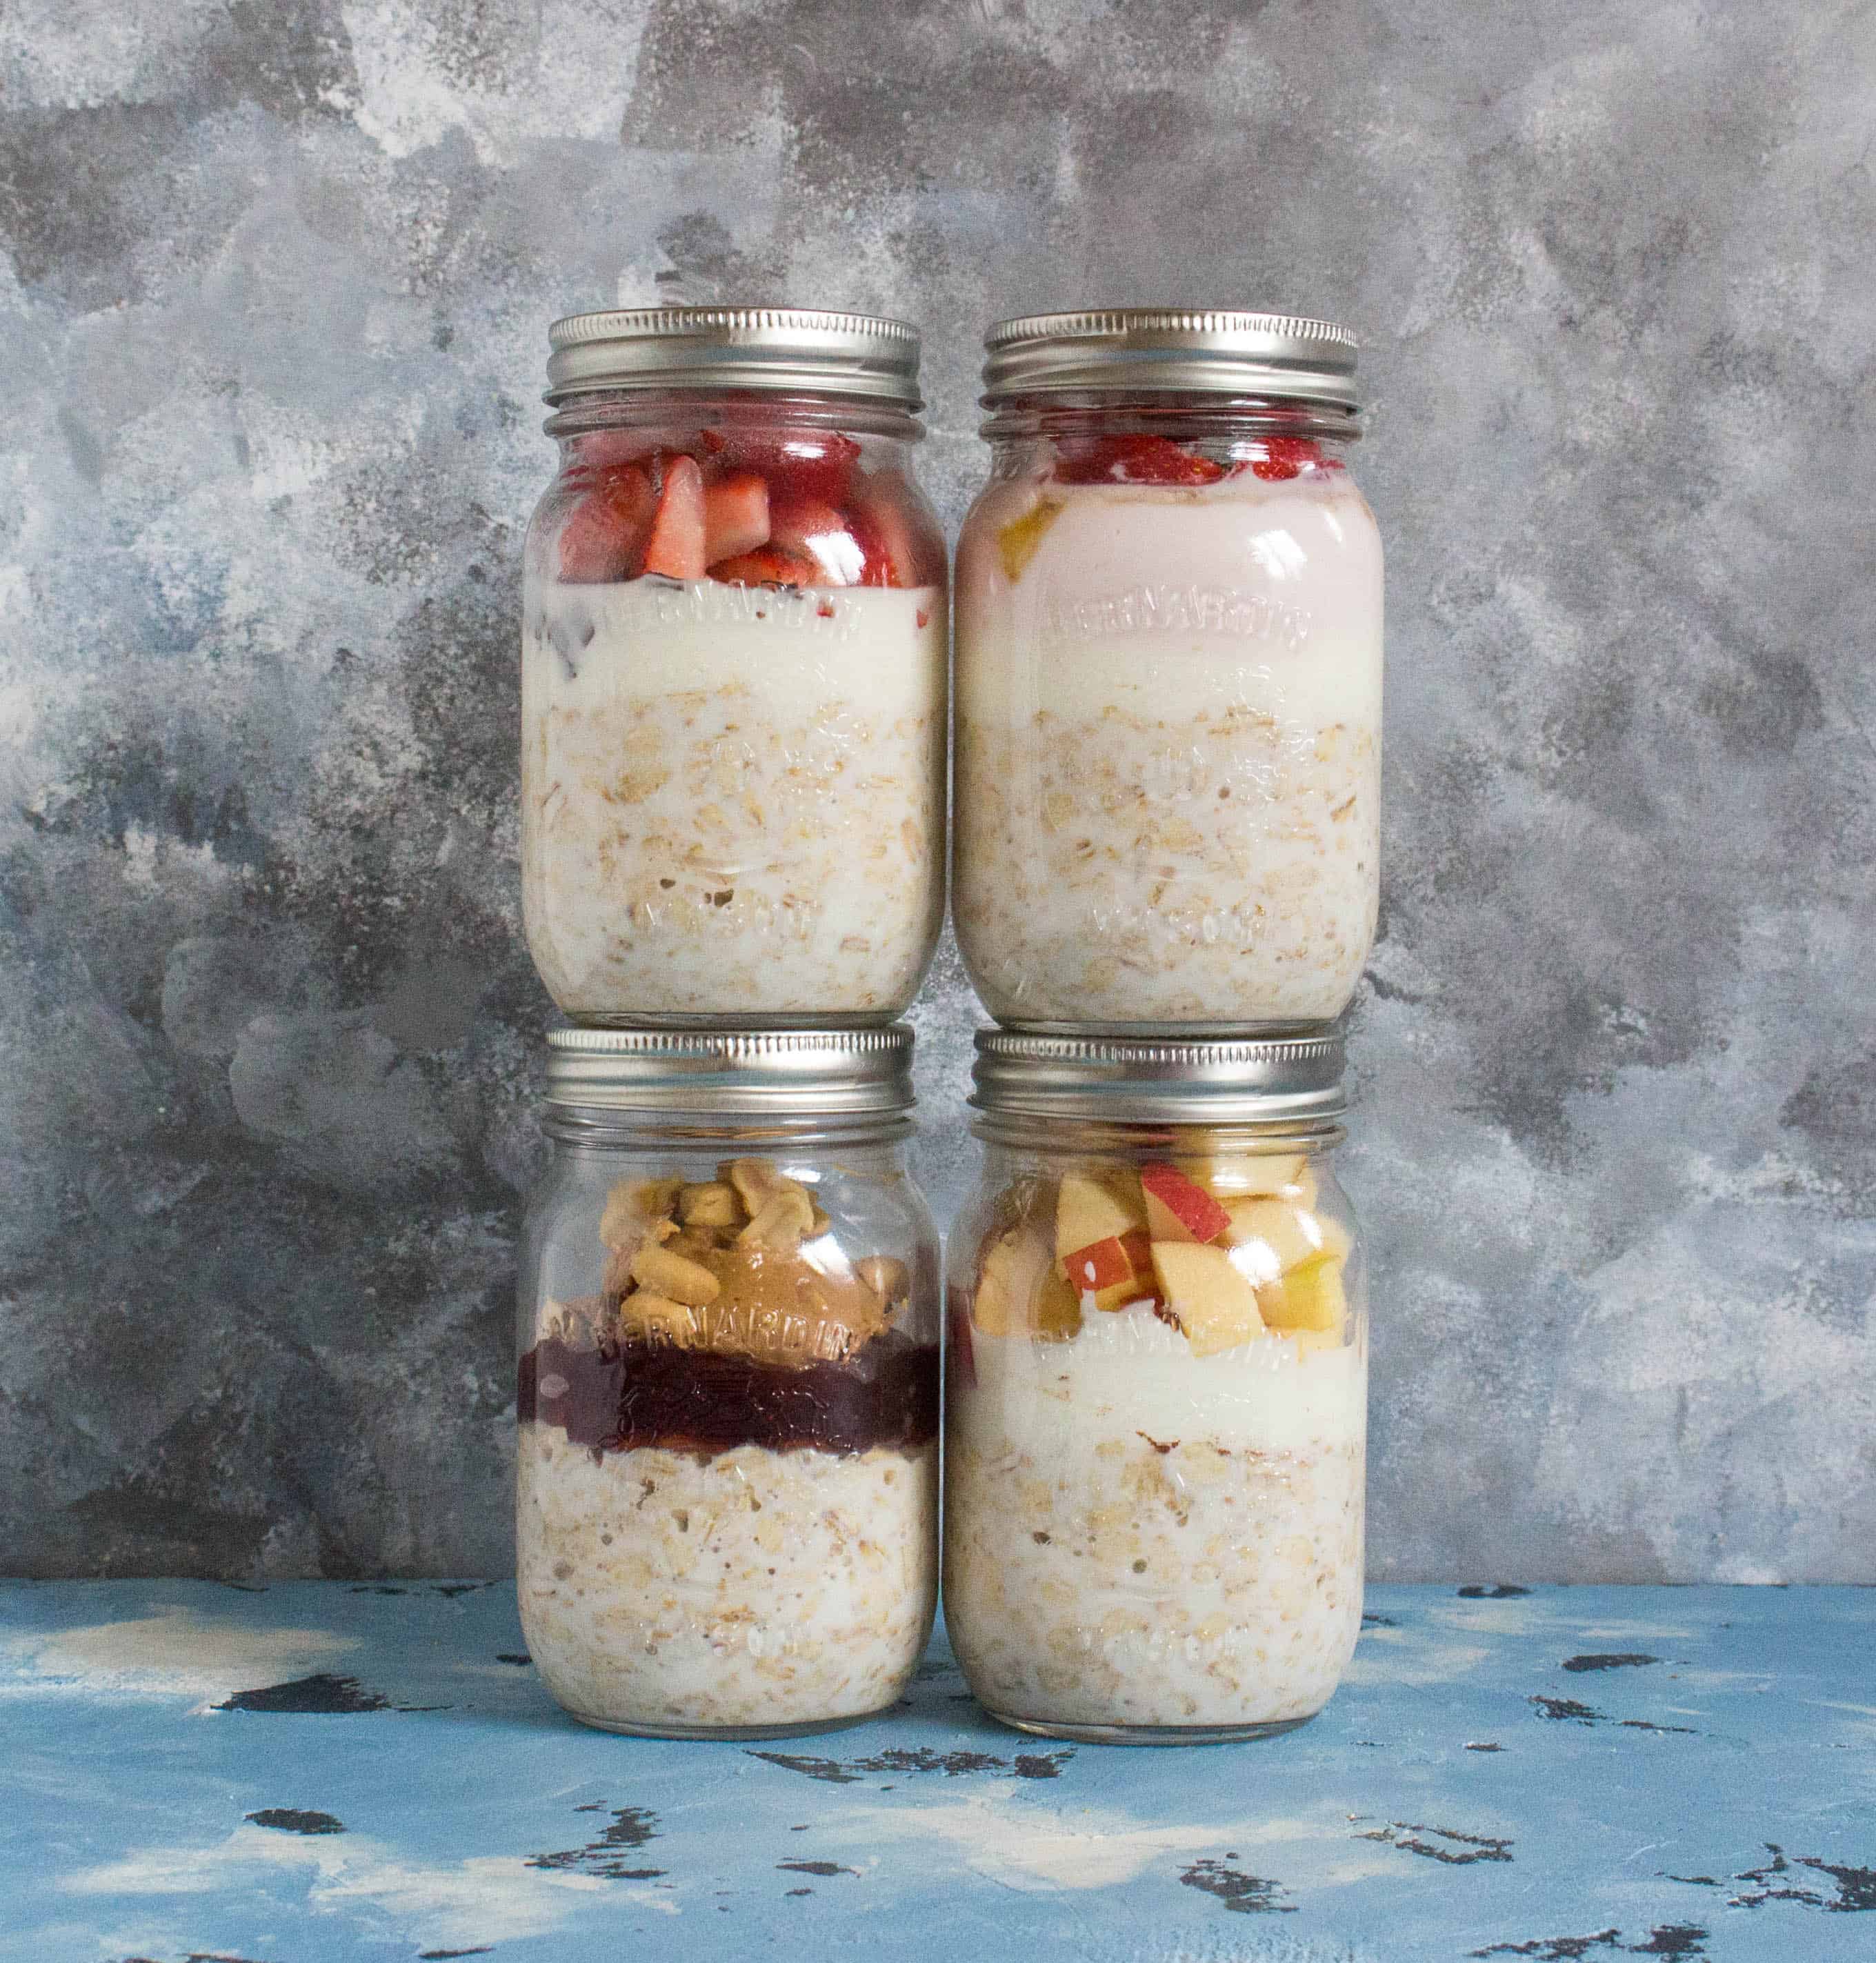 9-must-try-food-in-jars-recipes-mason-jar-meals-round-up-carmy